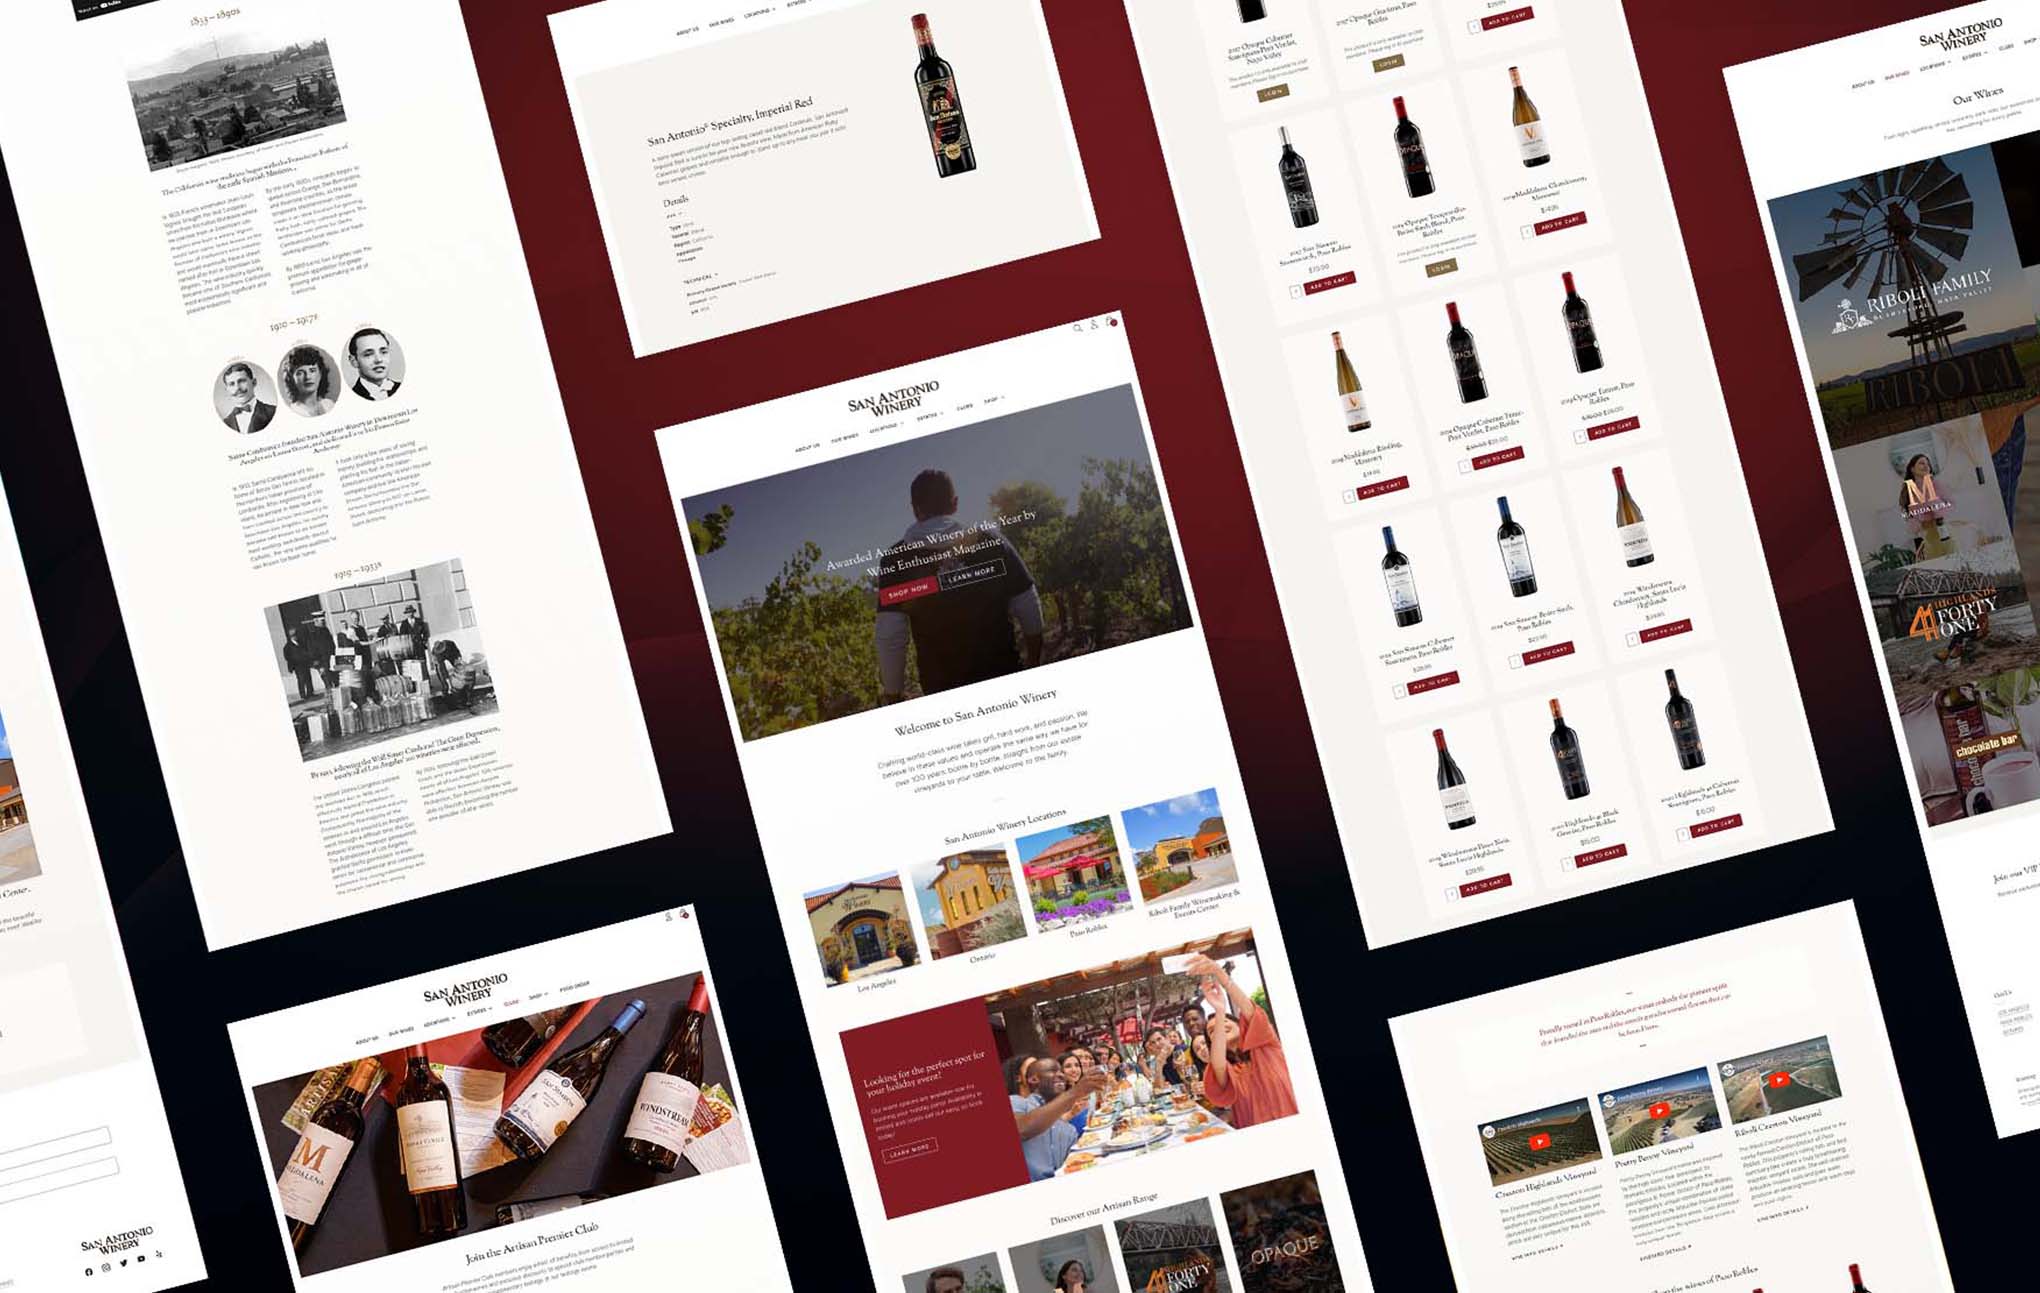 A collage of winery website pages displayed on a plain background, showing varied content including text, images of people, wine bottles, and scenic landscapes, all designed with a consistent red and white color scheme